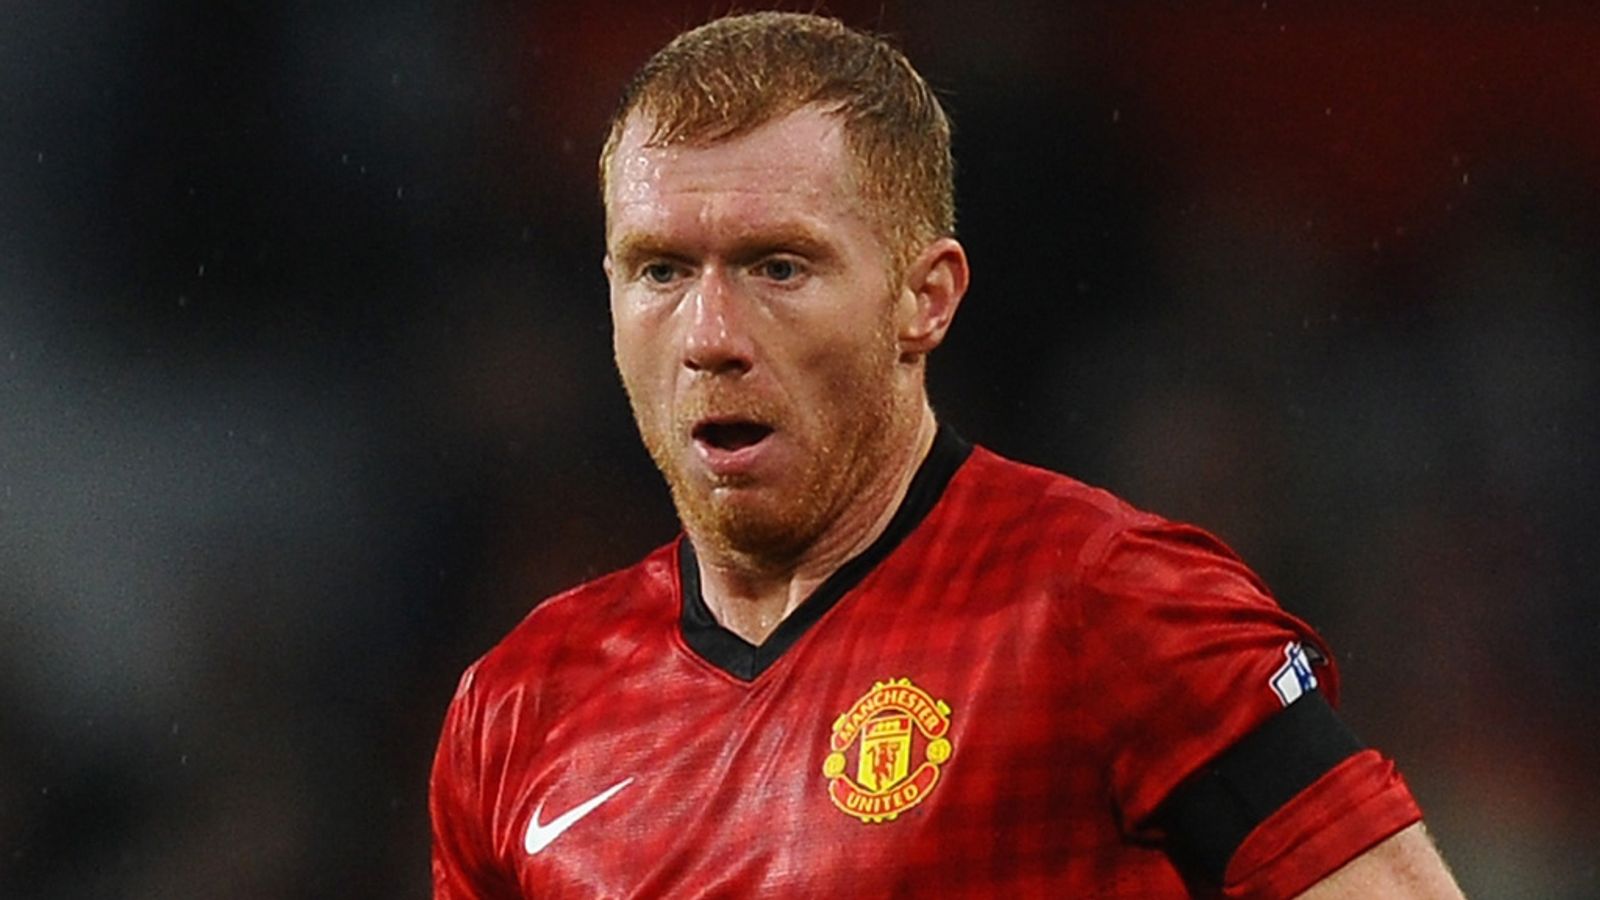 Manchester United midfielder Paul Scholes still out with knee injury - Football News - Sky Sports